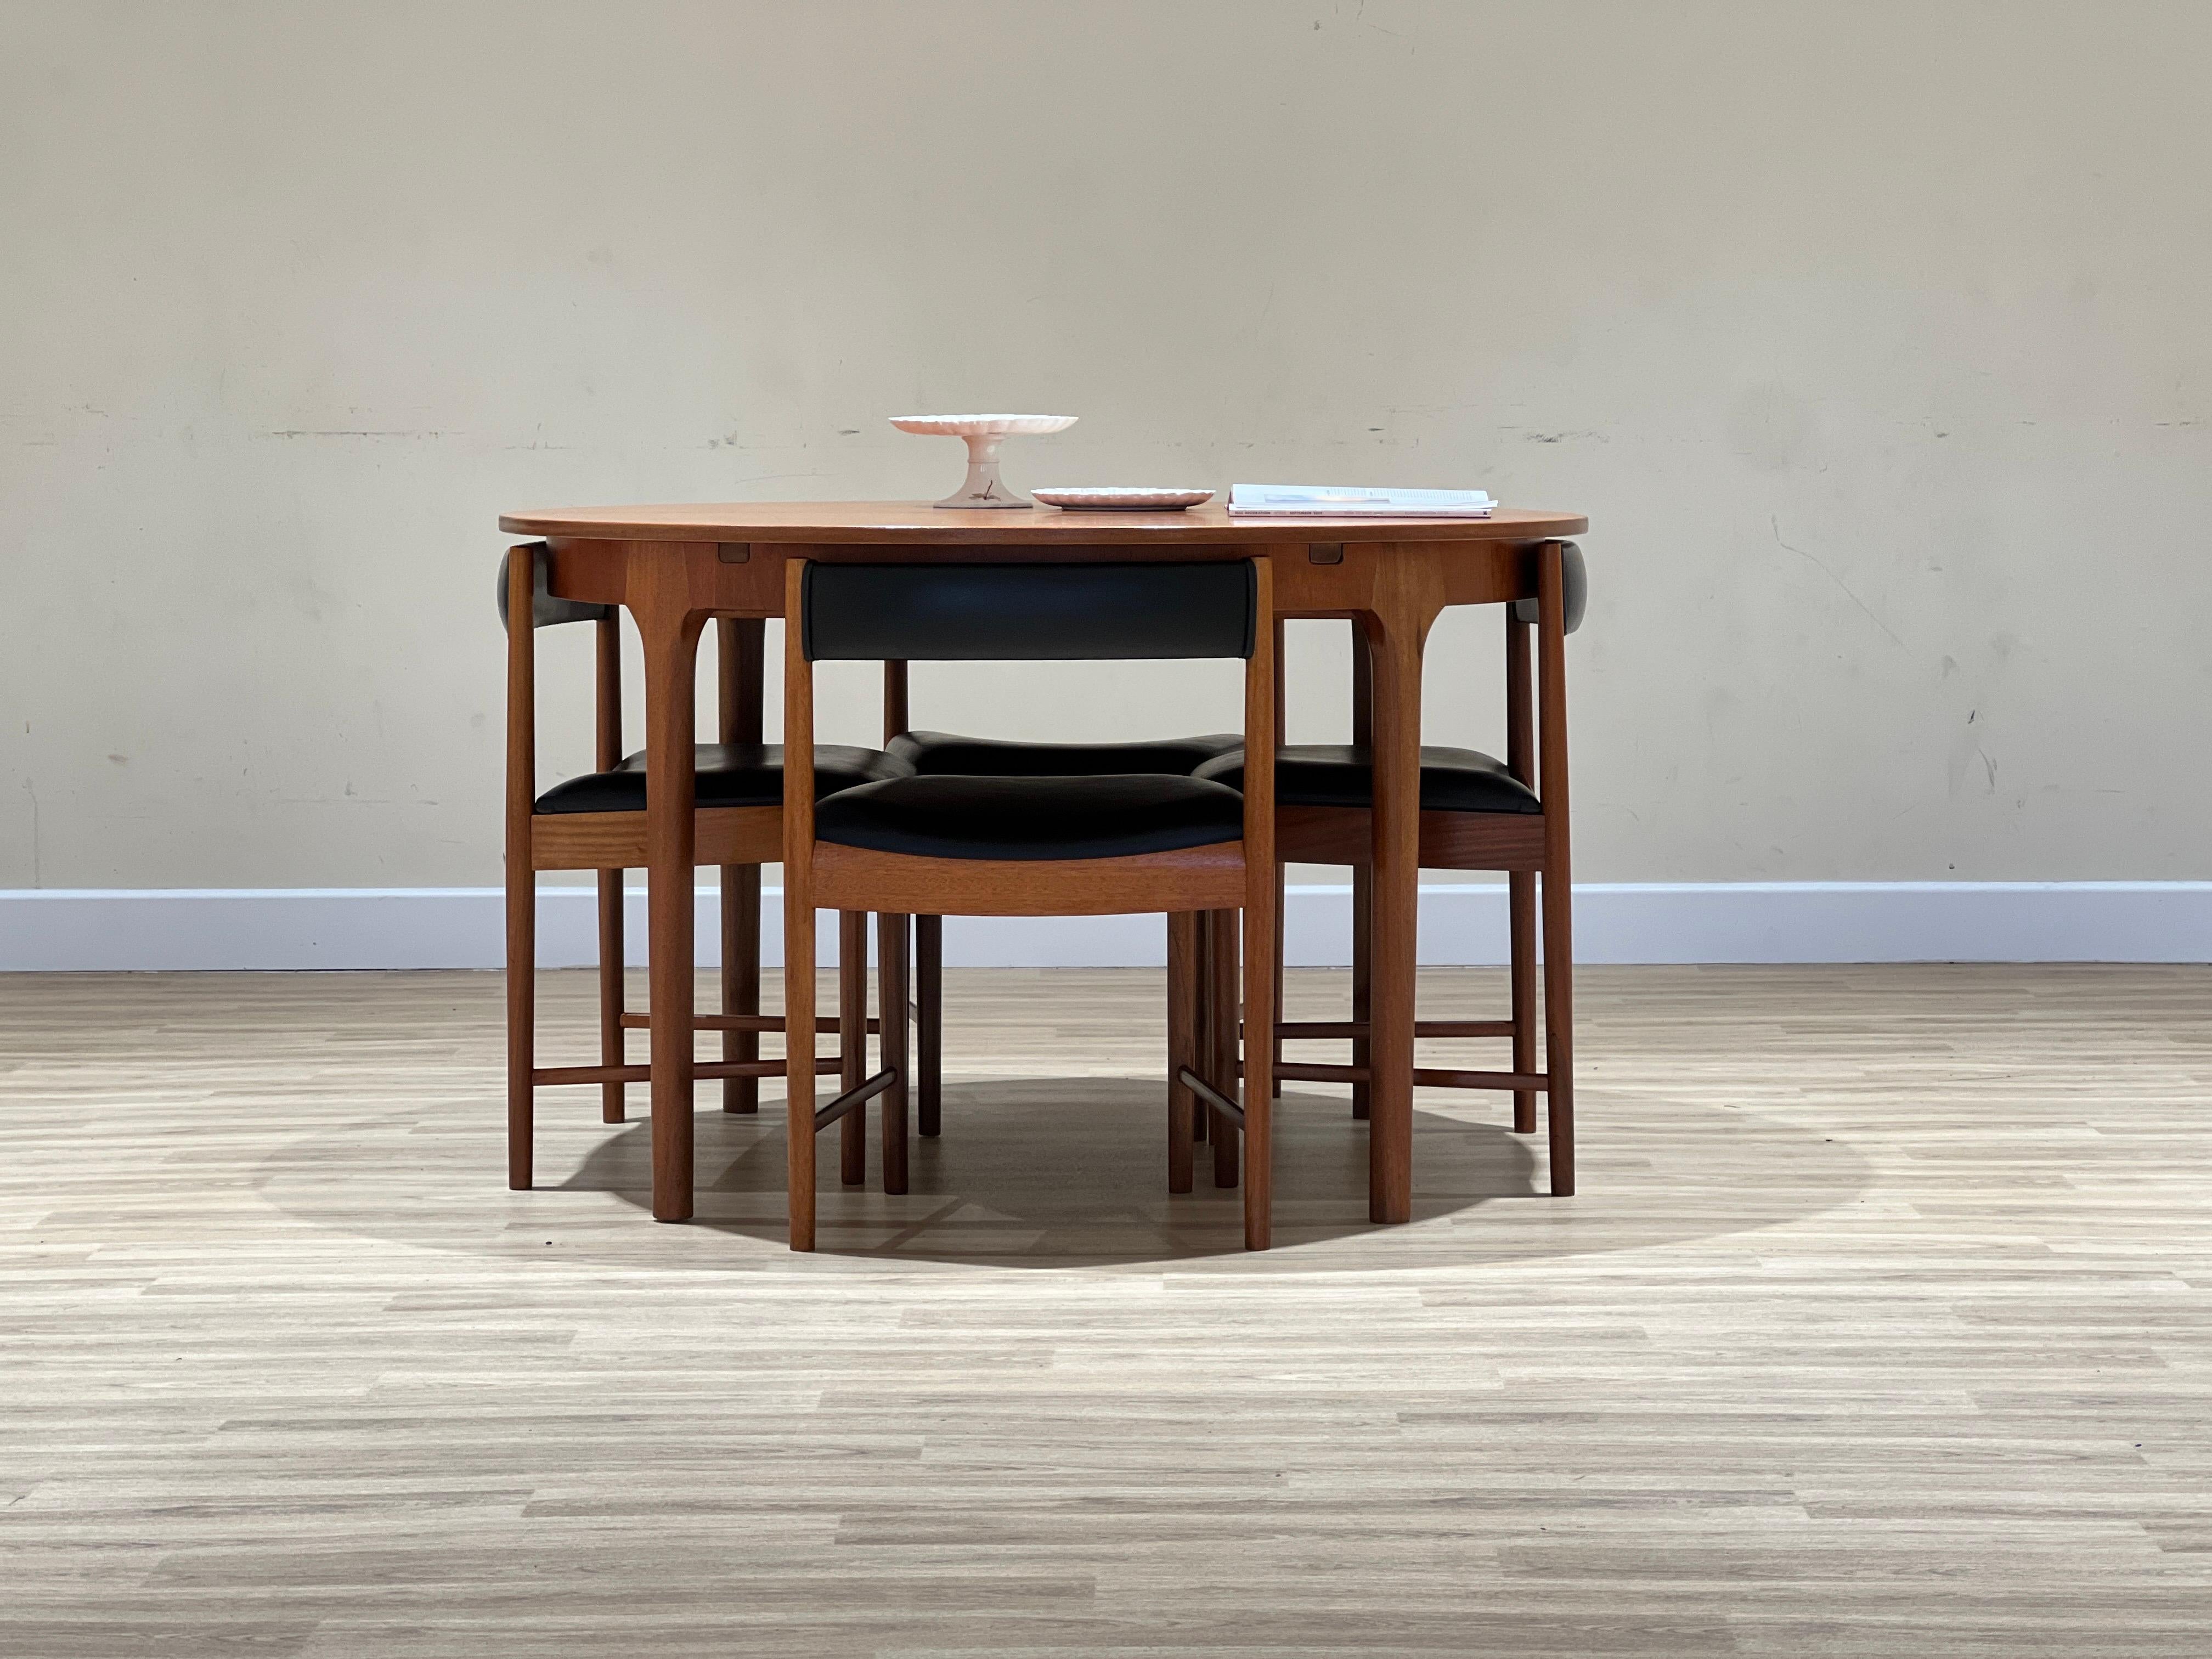 Set of an extendable circular table and 4 chairs from the Scottish firm A.H. McIntosh & Co., created by Tom Robertson.

This set was designed in the 70s. The table (model T21) is constructed with solid teak legs and teak veneered tabletop.

It opens